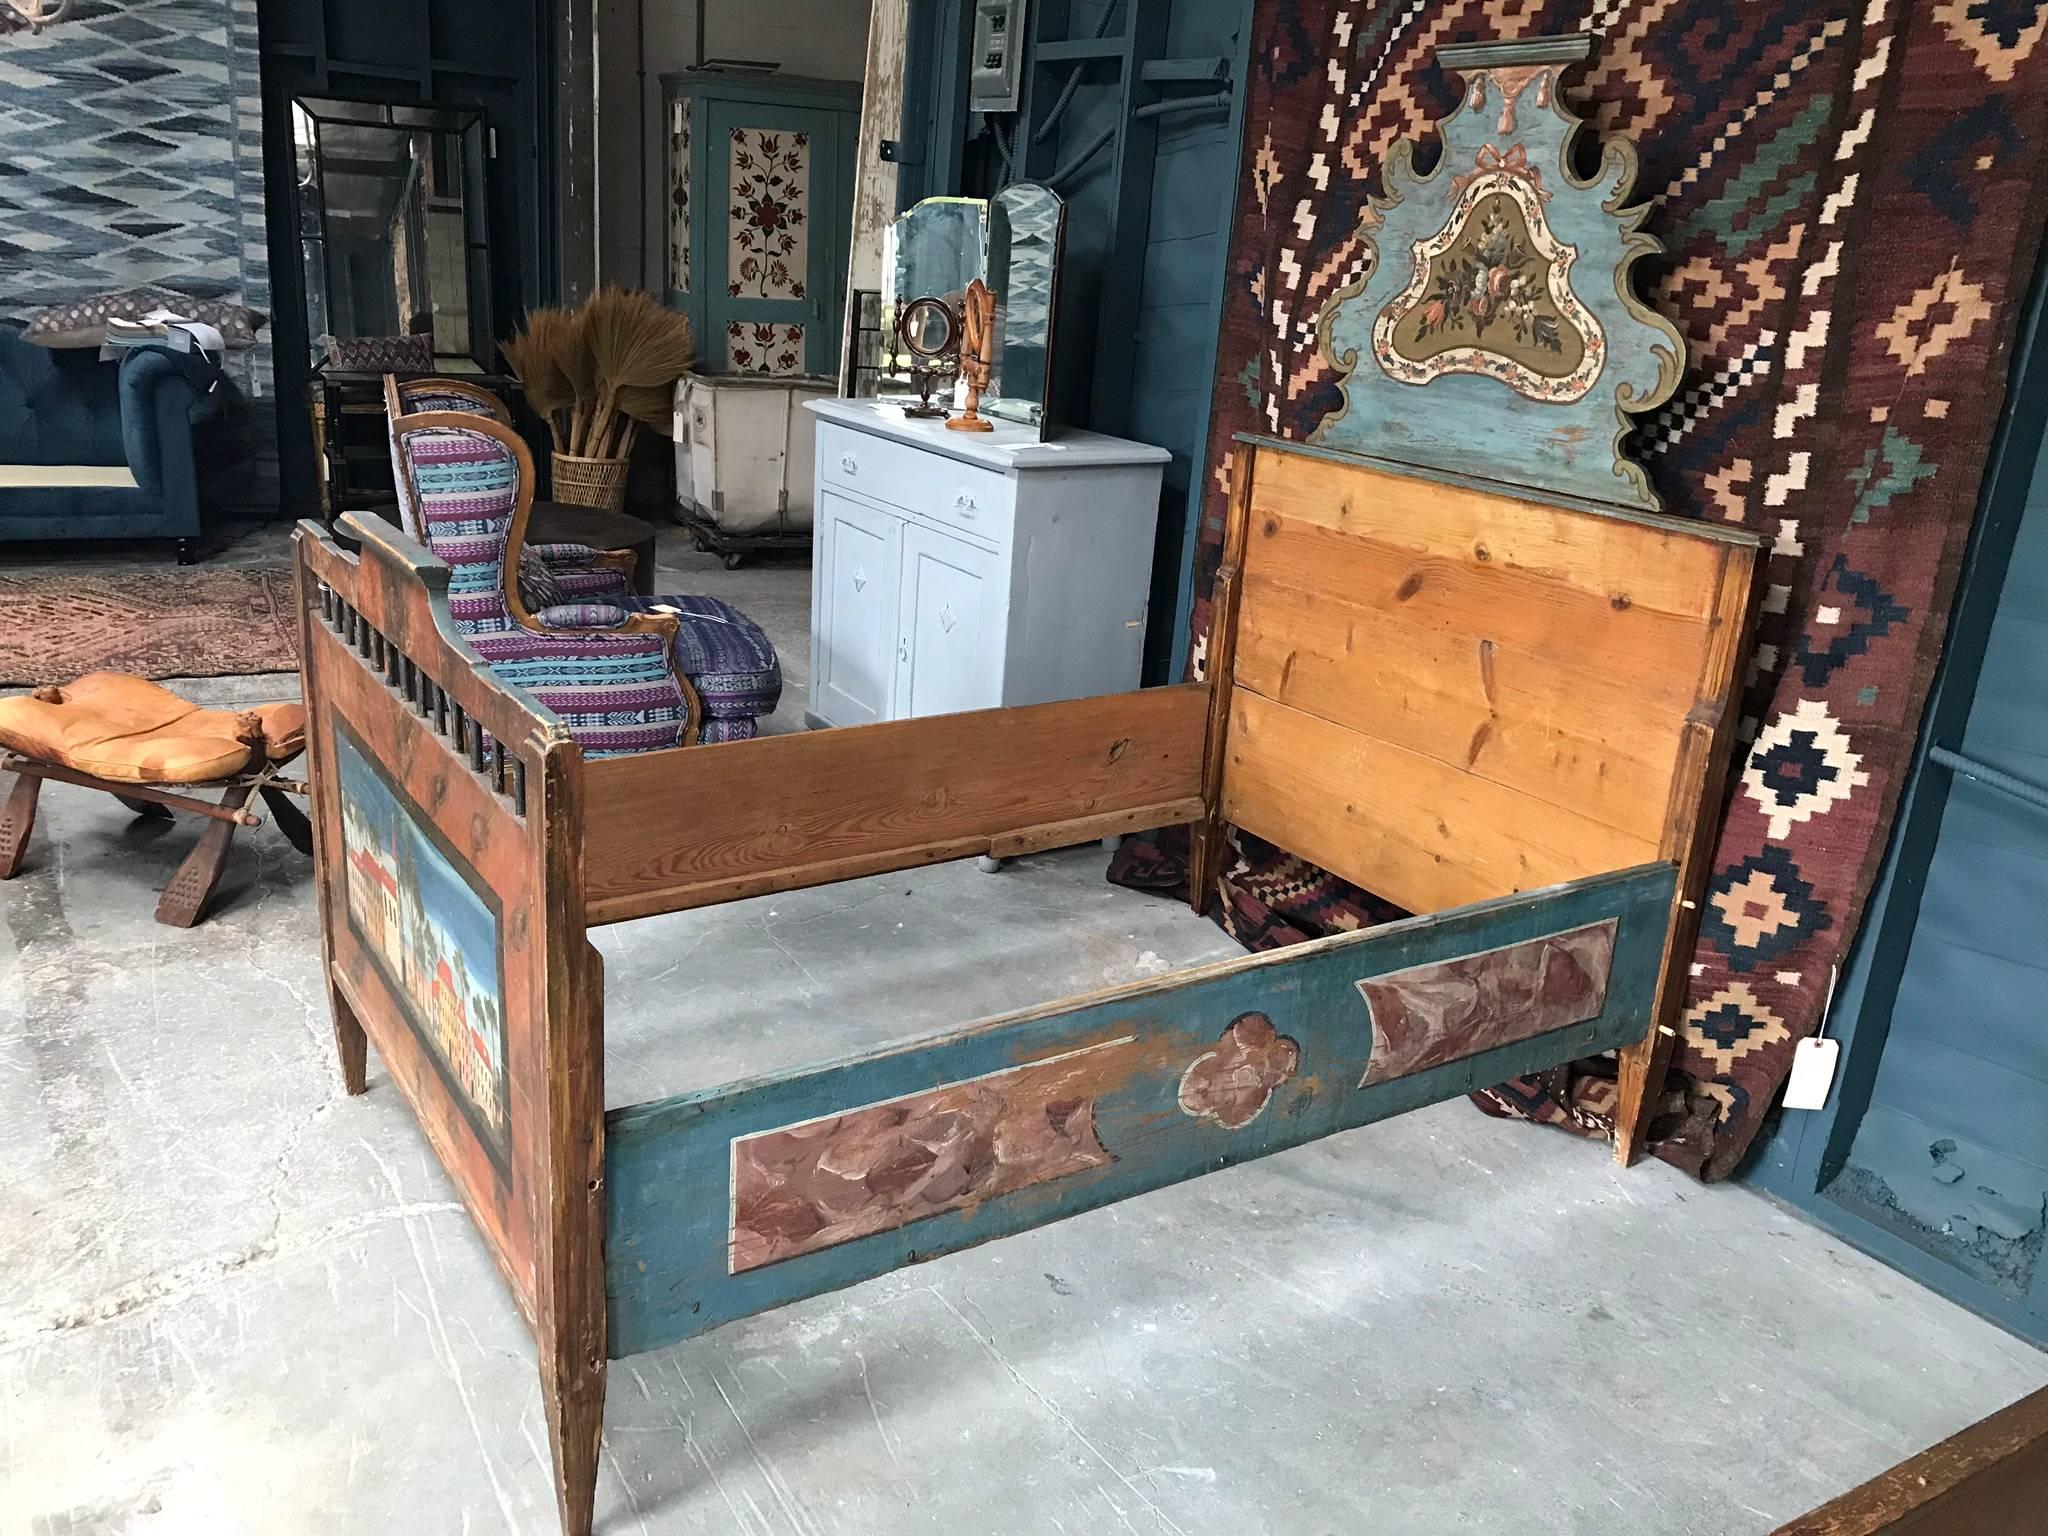 Late 19th century children's bed frame in oak. Features a hand-painted scene of a town square, tapered legs and handcrafted wood decorative detailing.